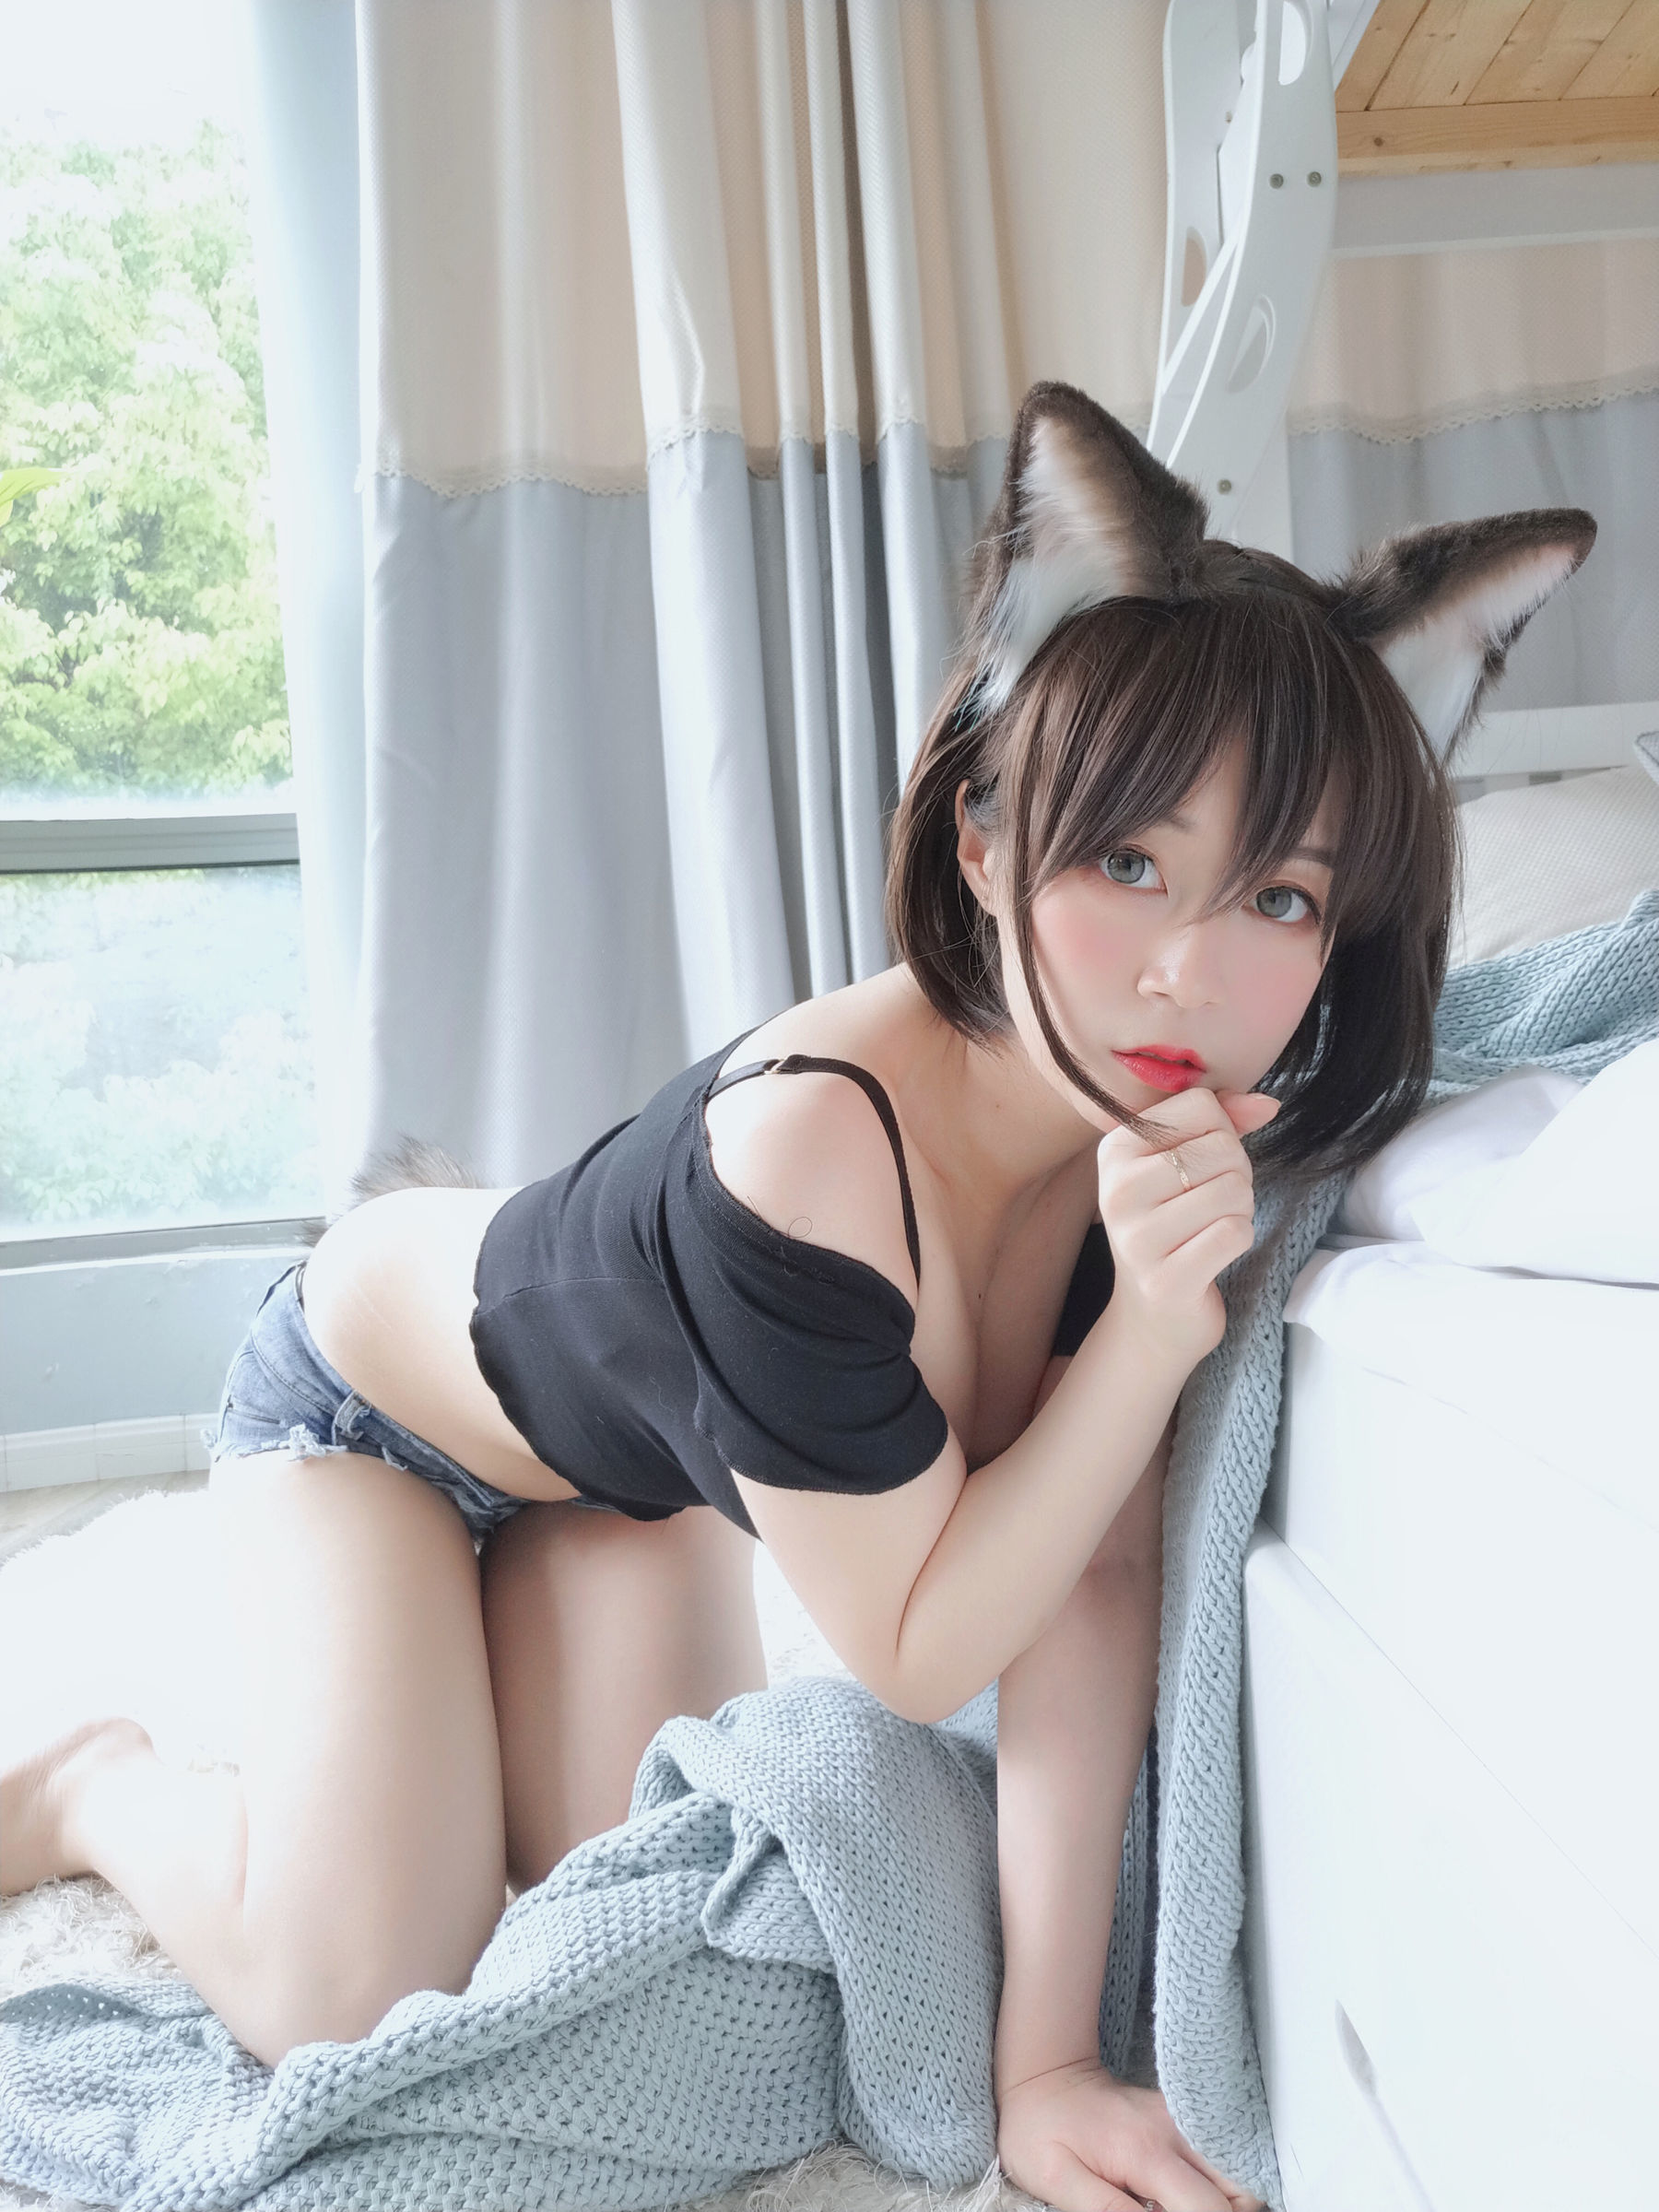 COSER Silver 81 "Puppet Cat" [COSPLAY Girl] Page 7 No.6540d6